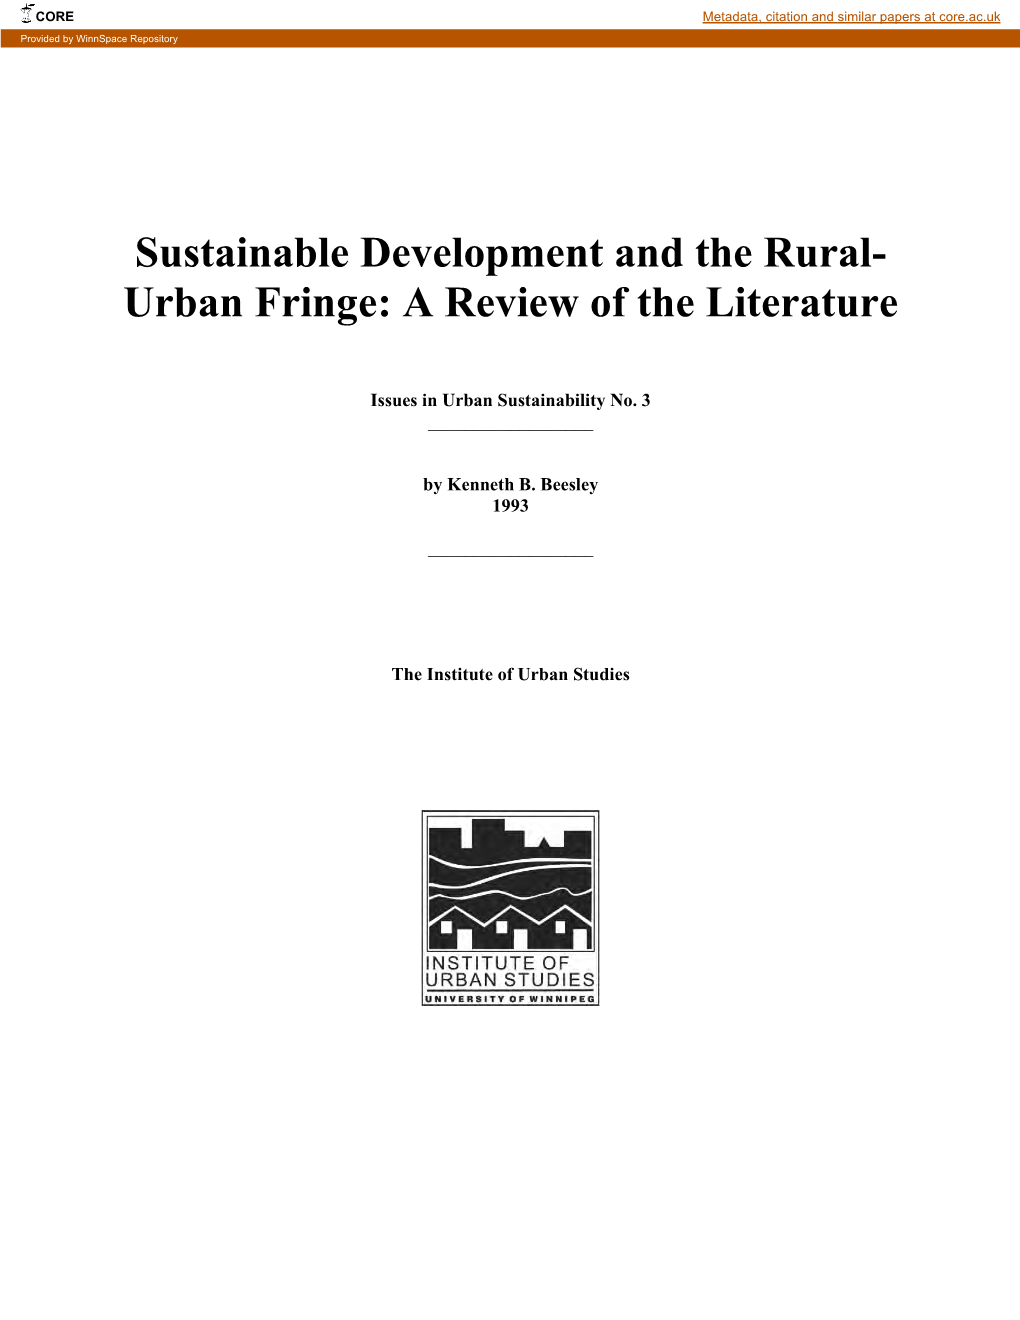 SUSTAINABLE DEVELOPMENT and the RURAL-URBAN FRINGE: a REVIEW of the LITERATURE Issues in Urban Sustainability No